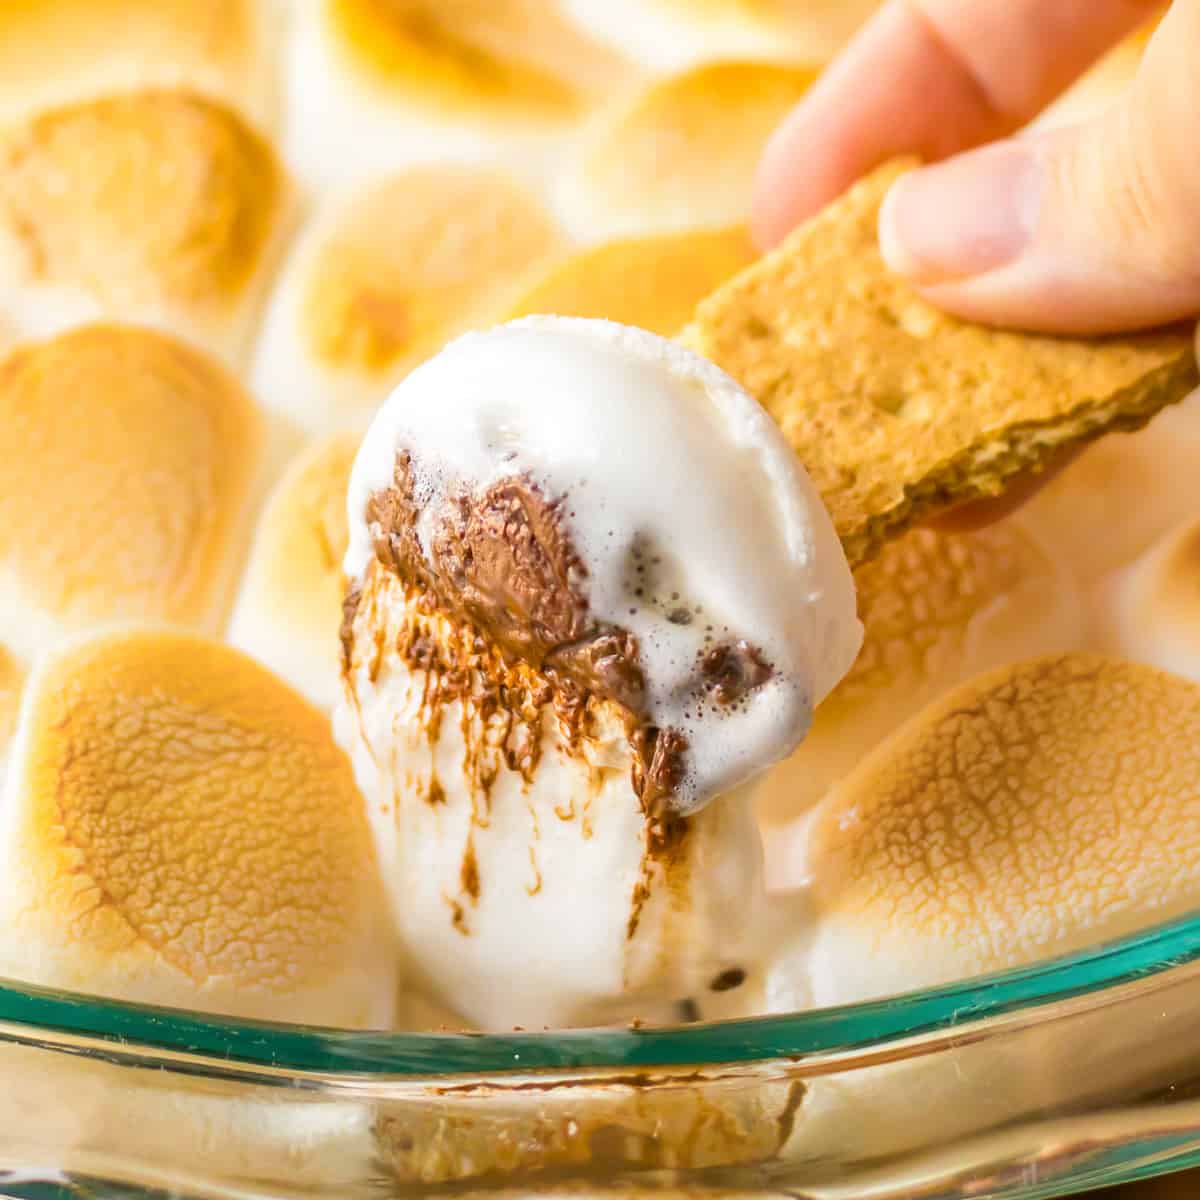 Graham cracker being dipped in s'mores dip made with marshmallows and chocolate chips.